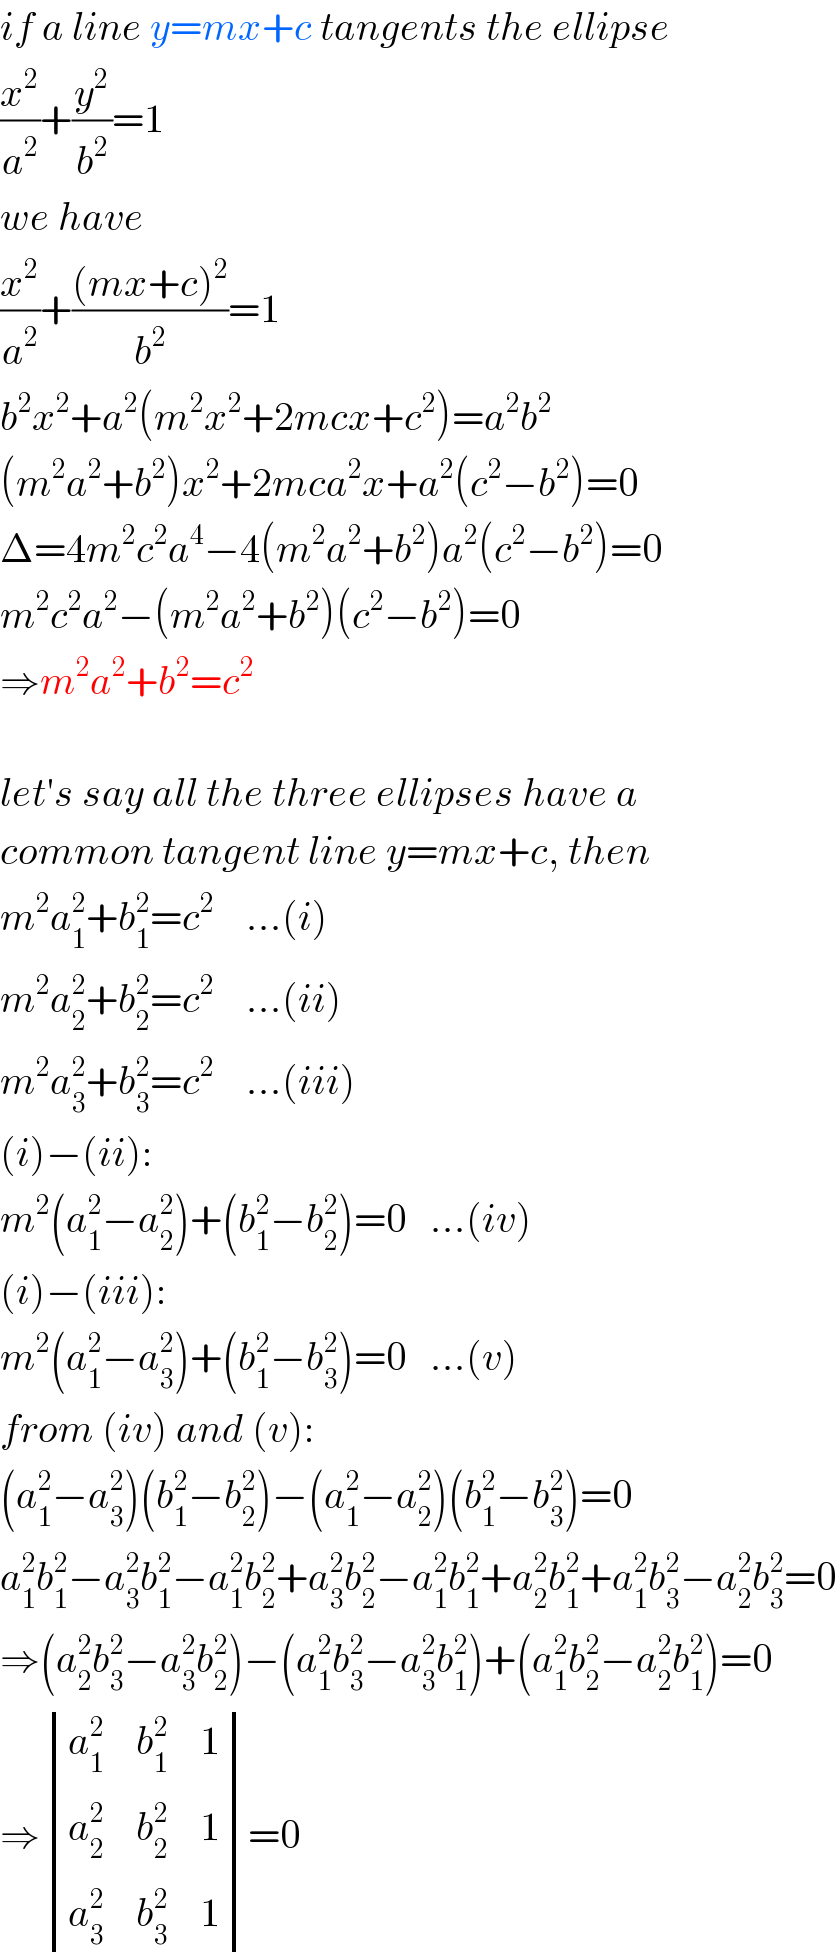 if a line y=mx+c tangents the ellipse  (x^2 /a^2 )+(y^2 /b^2 )=1  we have  (x^2 /a^2 )+(((mx+c)^2 )/b^2 )=1  b^2 x^2 +a^2 (m^2 x^2 +2mcx+c^2 )=a^2 b^2   (m^2 a^2 +b^2 )x^2 +2mca^2 x+a^2 (c^2 −b^2 )=0  Δ=4m^2 c^2 a^4 −4(m^2 a^2 +b^2 )a^2 (c^2 −b^2 )=0  m^2 c^2 a^2 −(m^2 a^2 +b^2 )(c^2 −b^2 )=0  ⇒m^2 a^2 +b^2 =c^2     let′s say all the three ellipses have a  common tangent line y=mx+c, then  m^2 a_1 ^2 +b_1 ^2 =c^2     ...(i)  m^2 a_2 ^2 +b_2 ^2 =c^2     ...(ii)  m^2 a_3 ^2 +b_3 ^2 =c^2     ...(iii)  (i)−(ii):  m^2 (a_1 ^2 −a_2 ^2 )+(b_1 ^2 −b_2 ^2 )=0   ...(iv)  (i)−(iii):  m^2 (a_1 ^2 −a_3 ^2 )+(b_1 ^2 −b_3 ^2 )=0   ...(v)  from (iv) and (v):  (a_1 ^2 −a_3 ^2 )(b_1 ^2 −b_2 ^2 )−(a_1 ^2 −a_2 ^2 )(b_1 ^2 −b_3 ^2 )=0  a_1 ^2 b_1 ^2 −a_3 ^2 b_1 ^2 −a_1 ^2 b_2 ^2 +a_3 ^2 b_2 ^2 −a_1 ^2 b_1 ^2 +a_2 ^2 b_1 ^2 +a_1 ^2 b_3 ^2 −a_2 ^2 b_3 ^2 =0  ⇒(a_2 ^2 b_3 ^2 −a_3 ^2 b_2 ^2 )−(a_1 ^2 b_3 ^2 −a_3 ^2 b_1 ^2 )+(a_1 ^2 b_2 ^2 −a_2 ^2 b_1 ^2 )=0  ⇒ determinant ((a_1 ^2 ,b_1 ^2 ,1),(a_2 ^2 ,b_2 ^2 ,1),(a_3 ^2 ,b_3 ^2 ,1))=0  